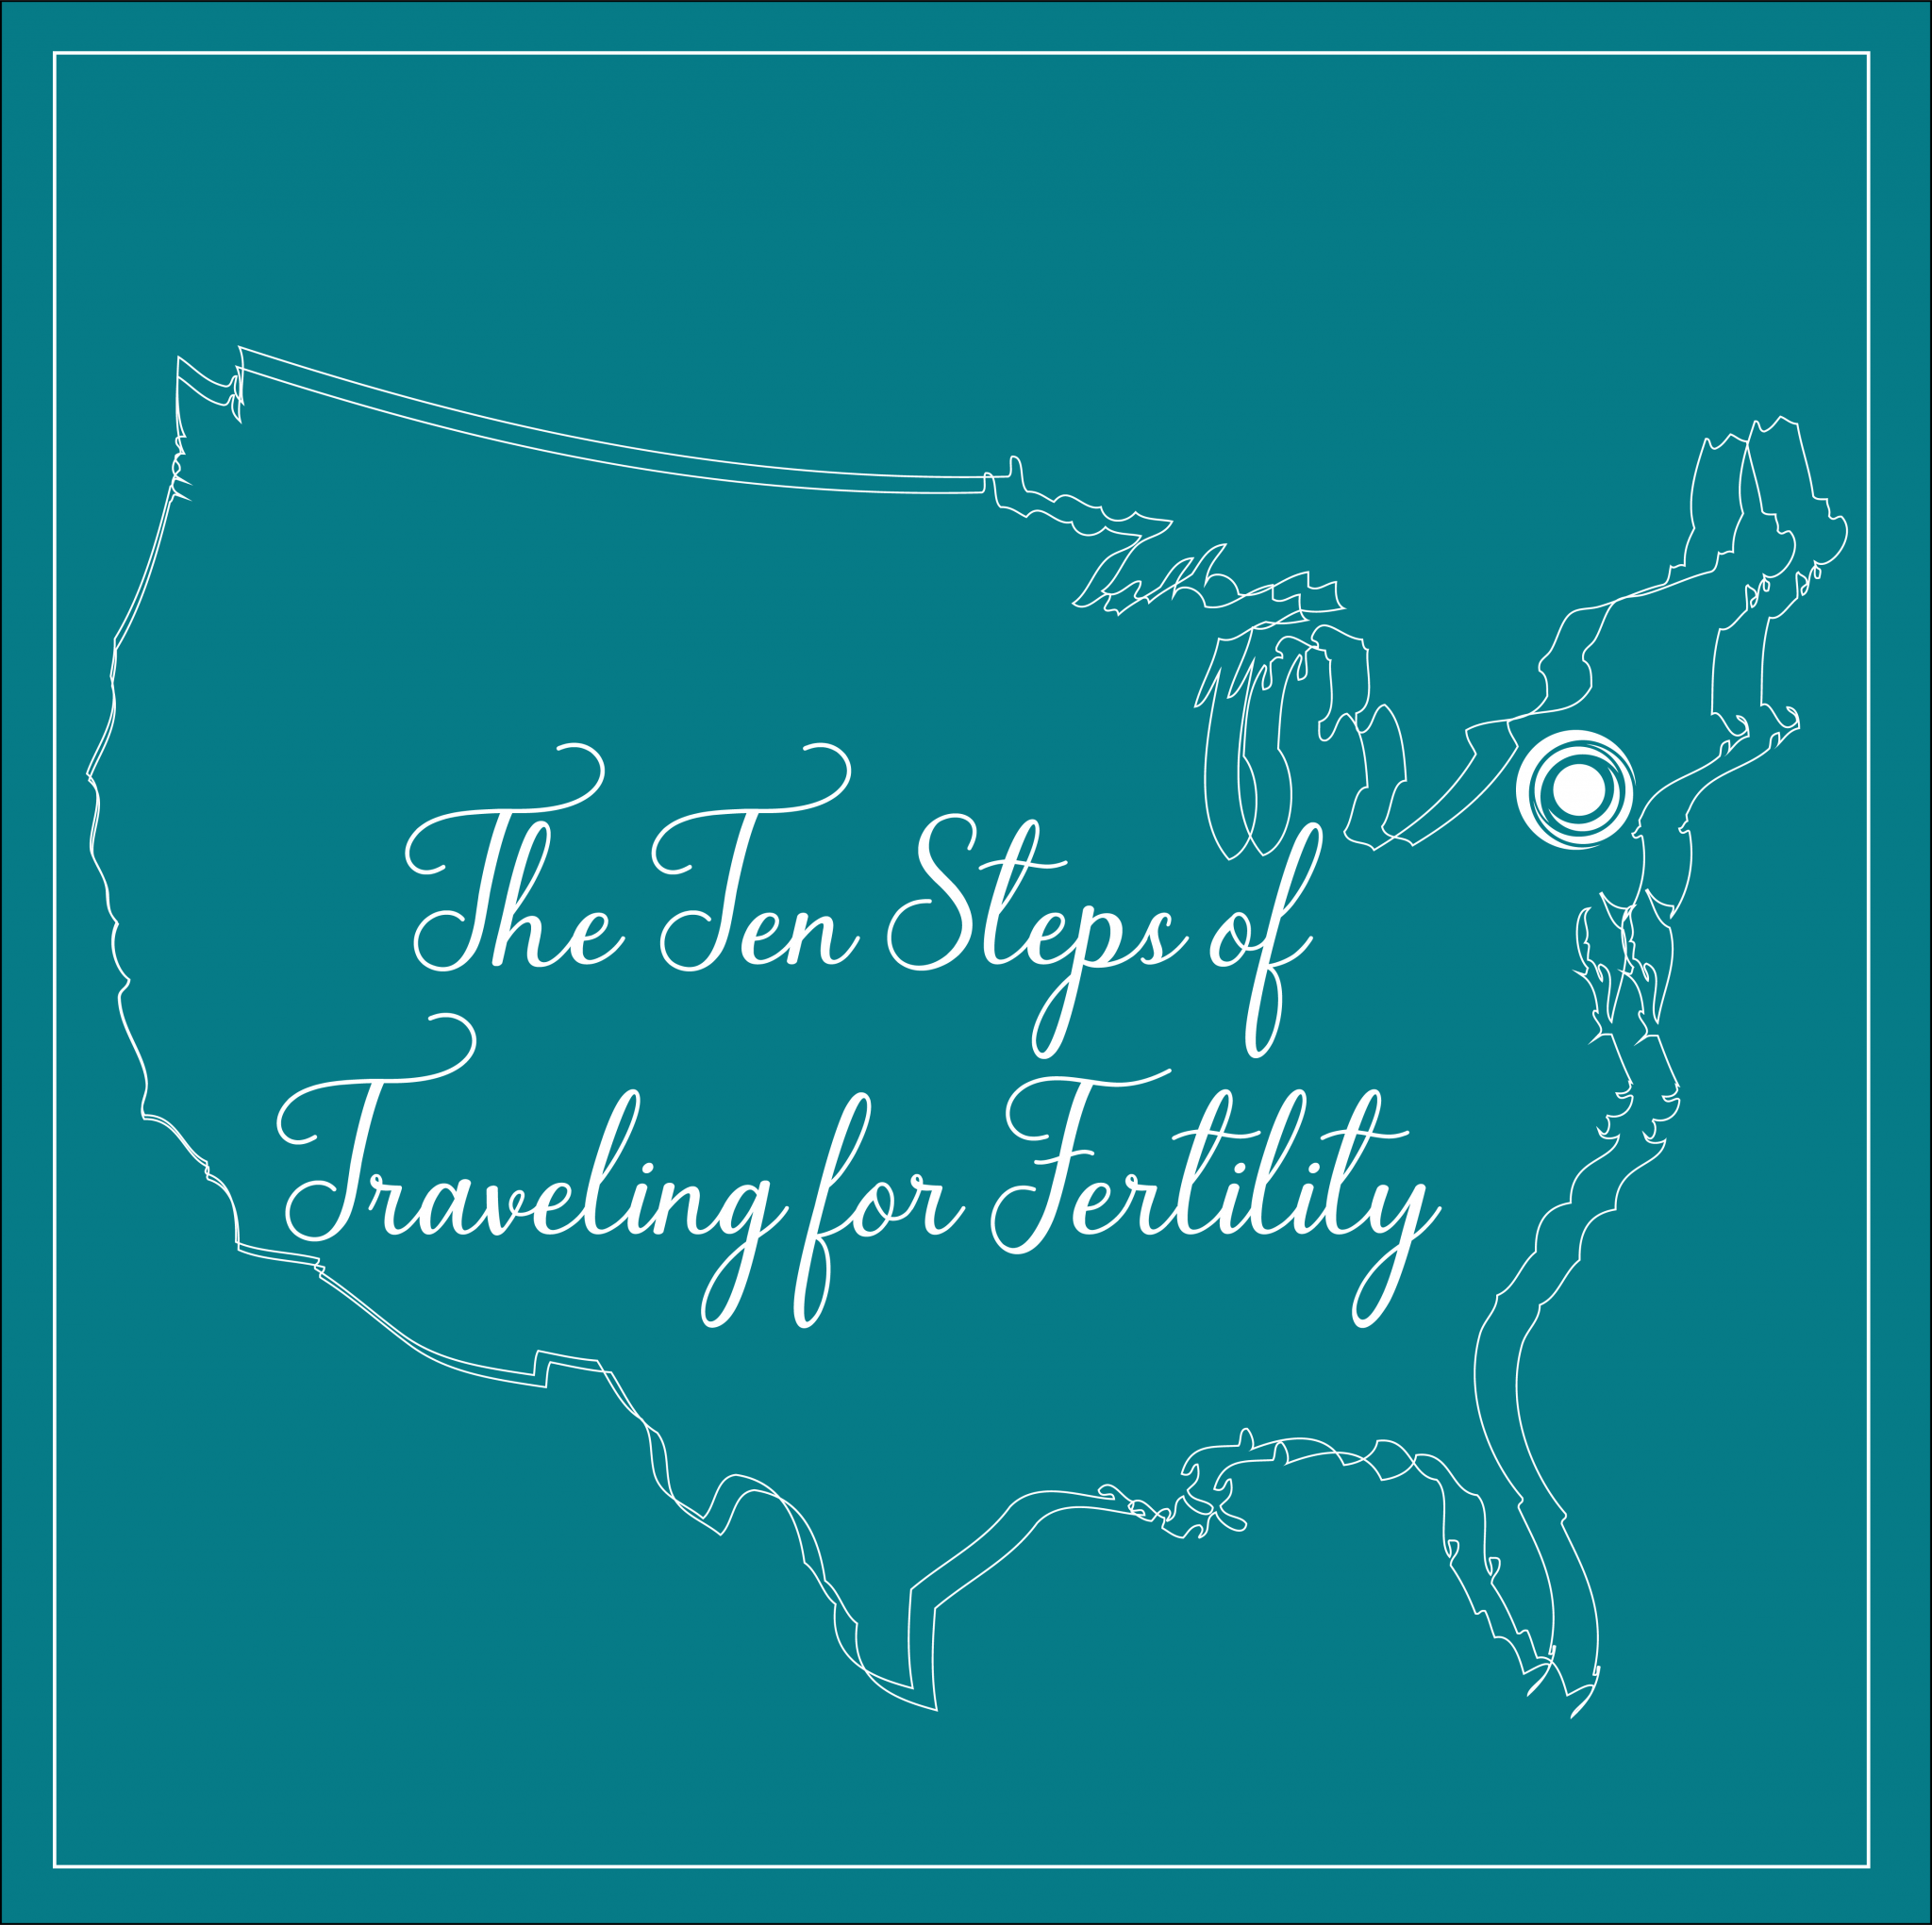 The Ten Steps of Traveling for Fertility